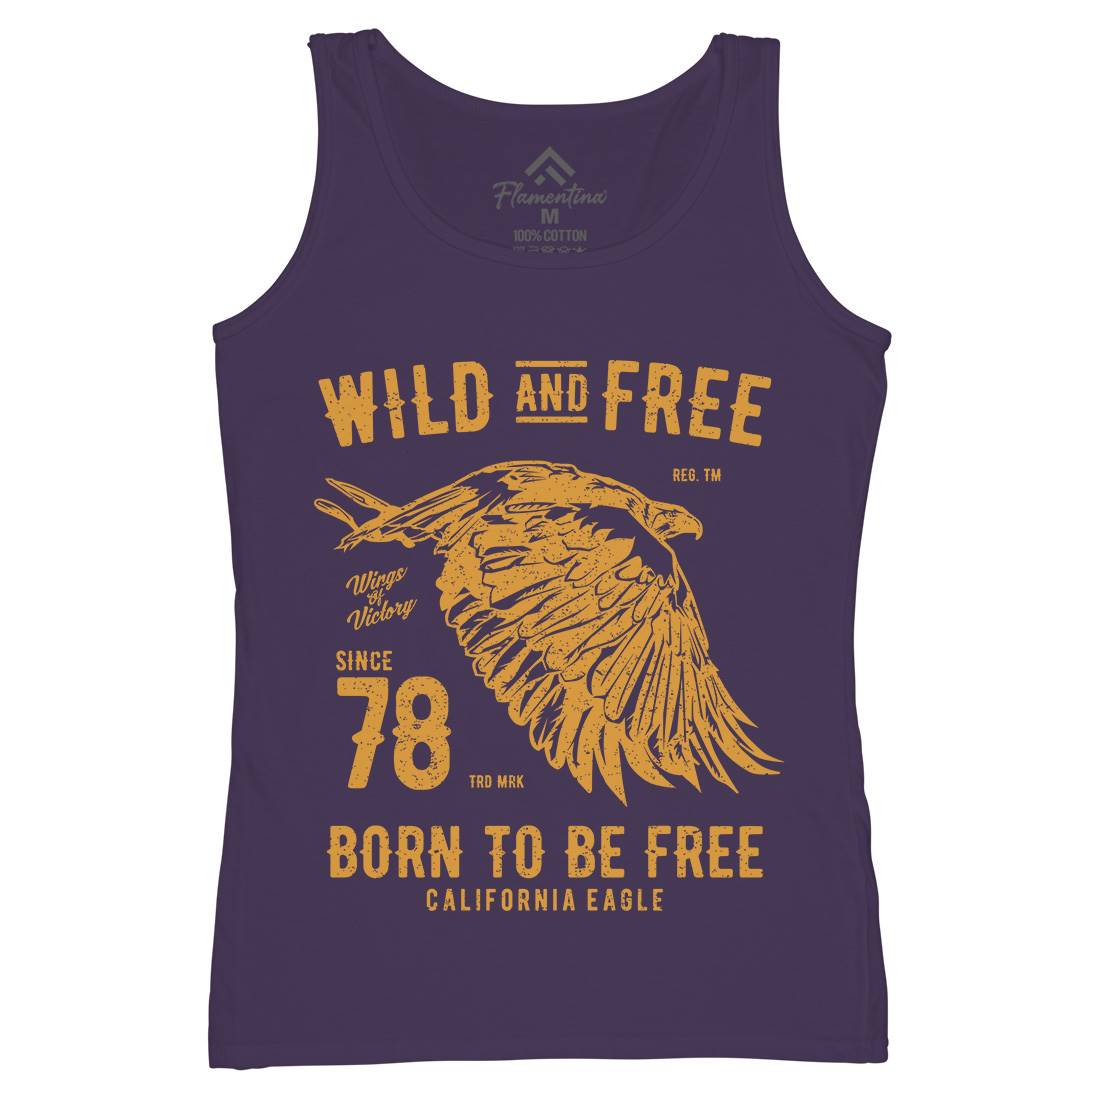 Wild And Free Womens Organic Tank Top Vest Army A792